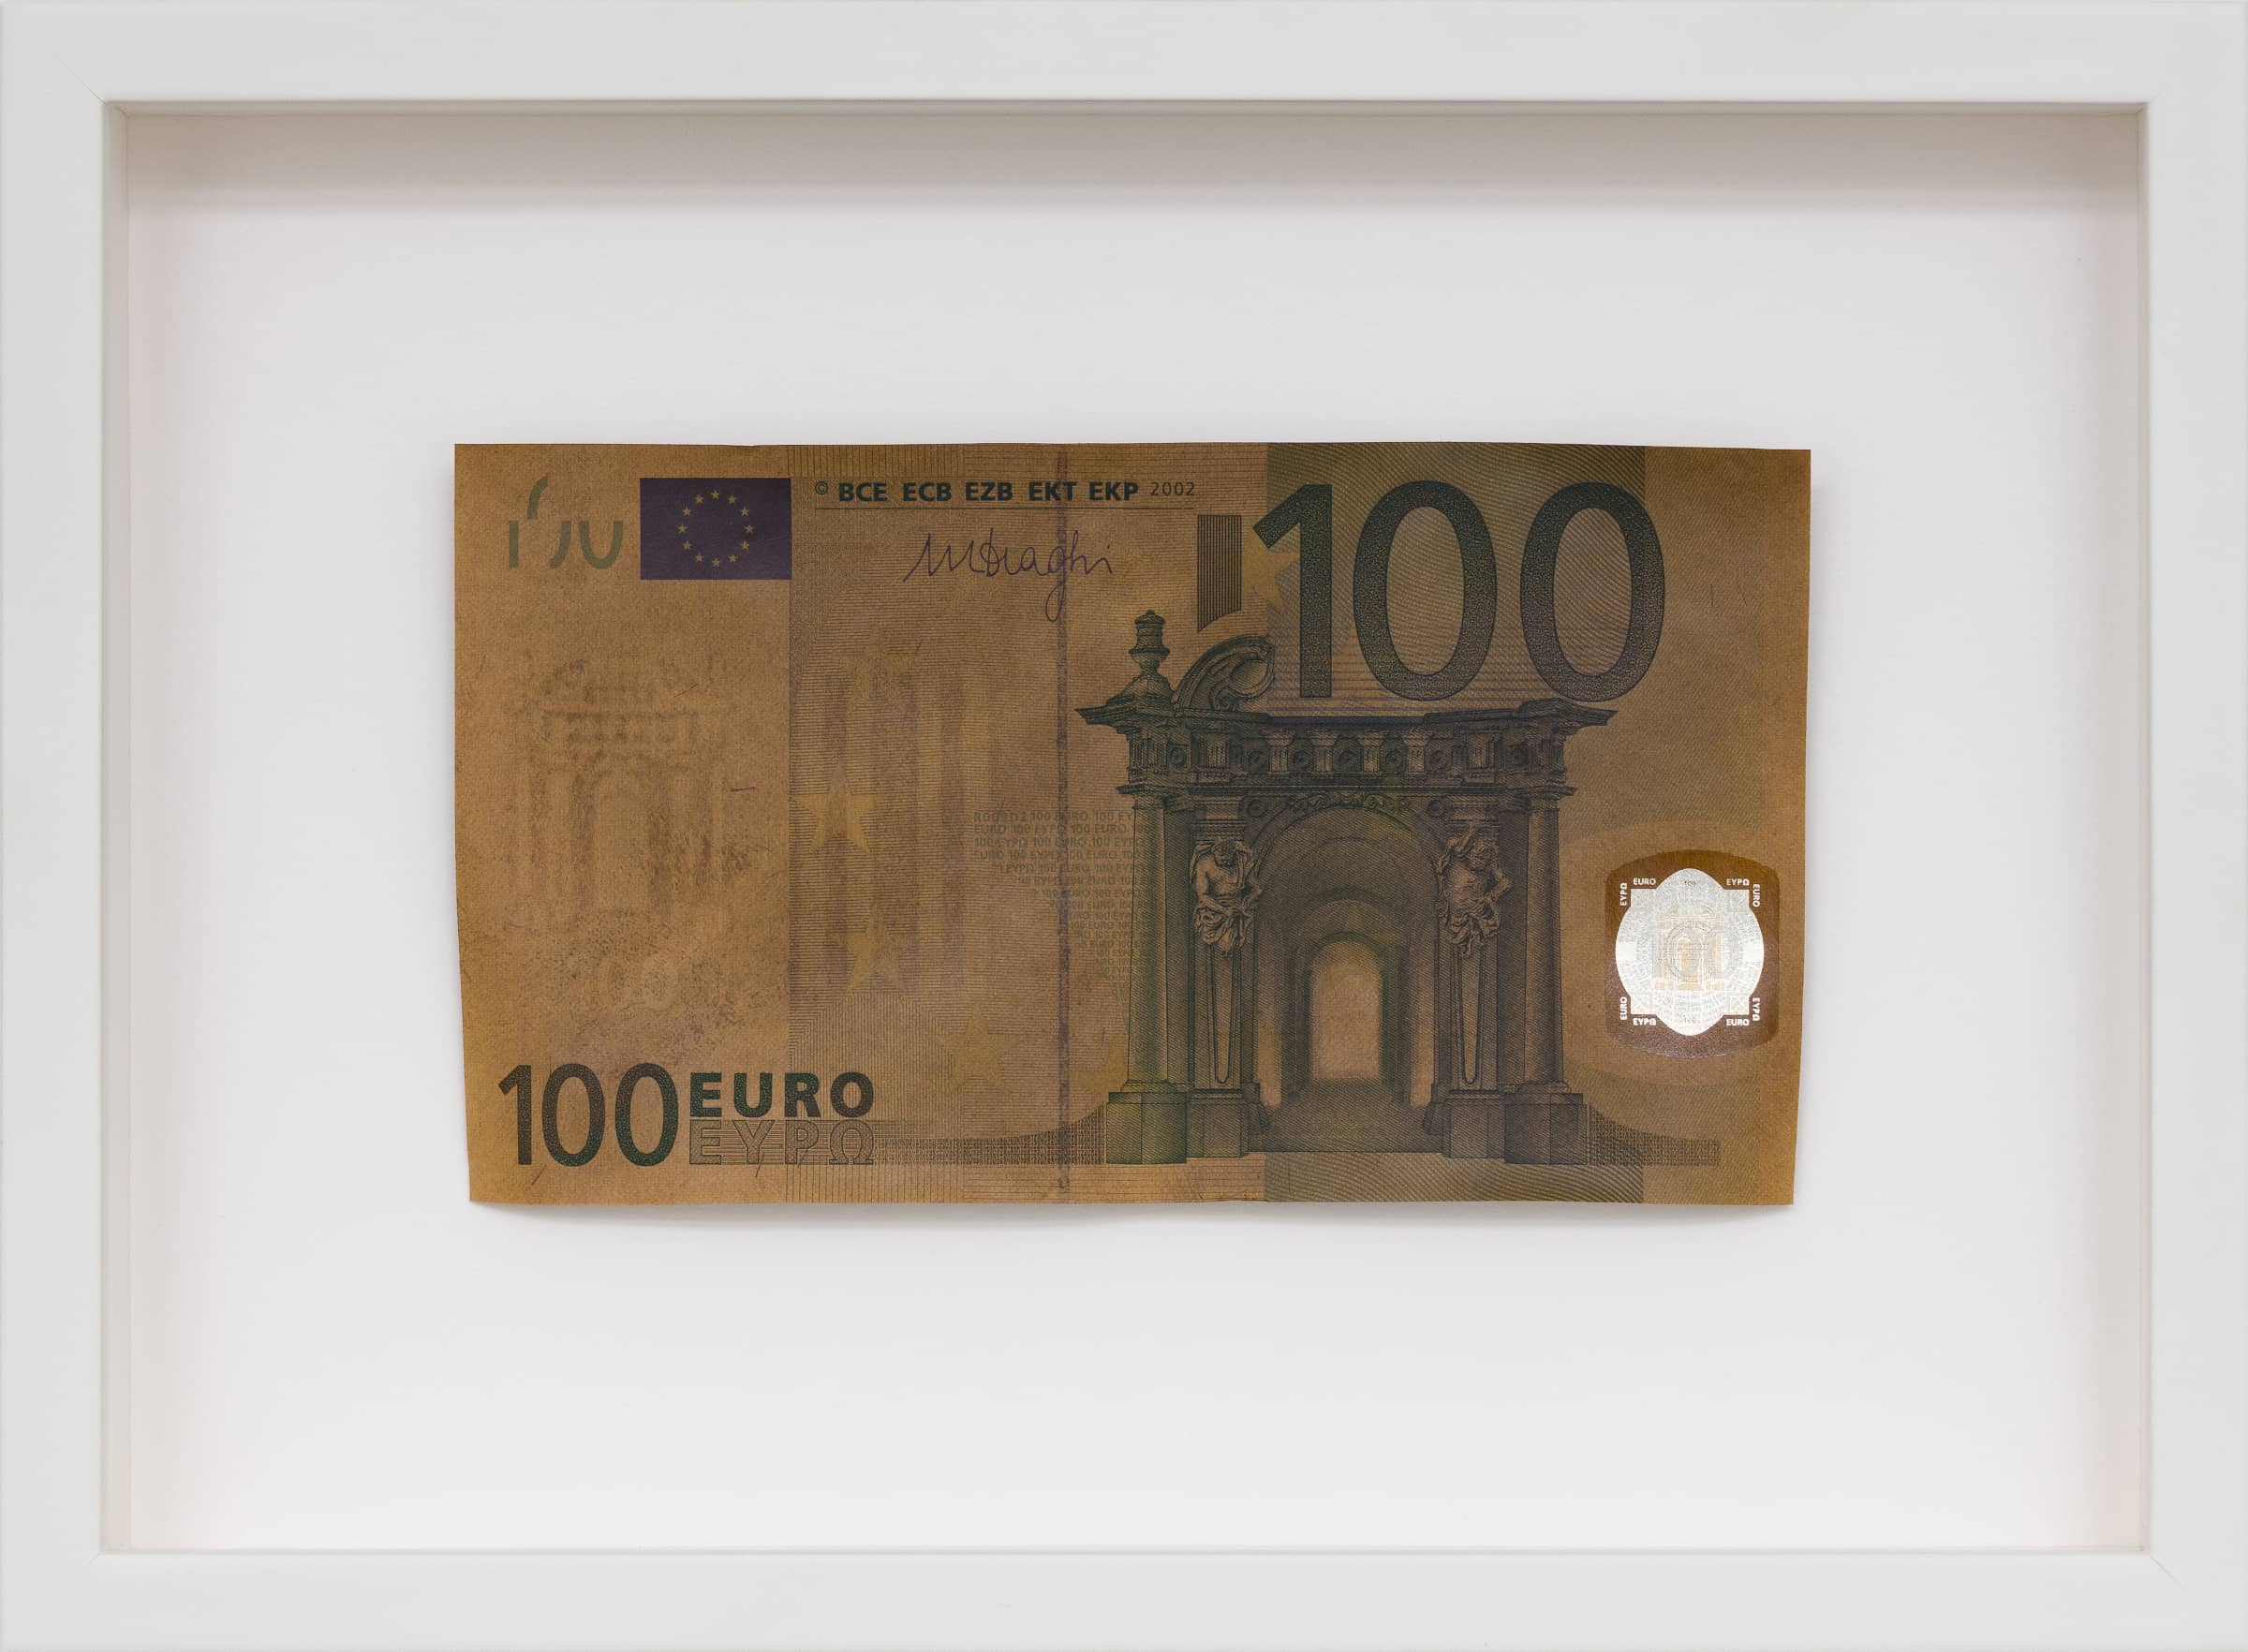 18_Takahiro Kudo_It Collapsed out of Shame_Untitled_278C_2016_100 euros banknote_17x24cm